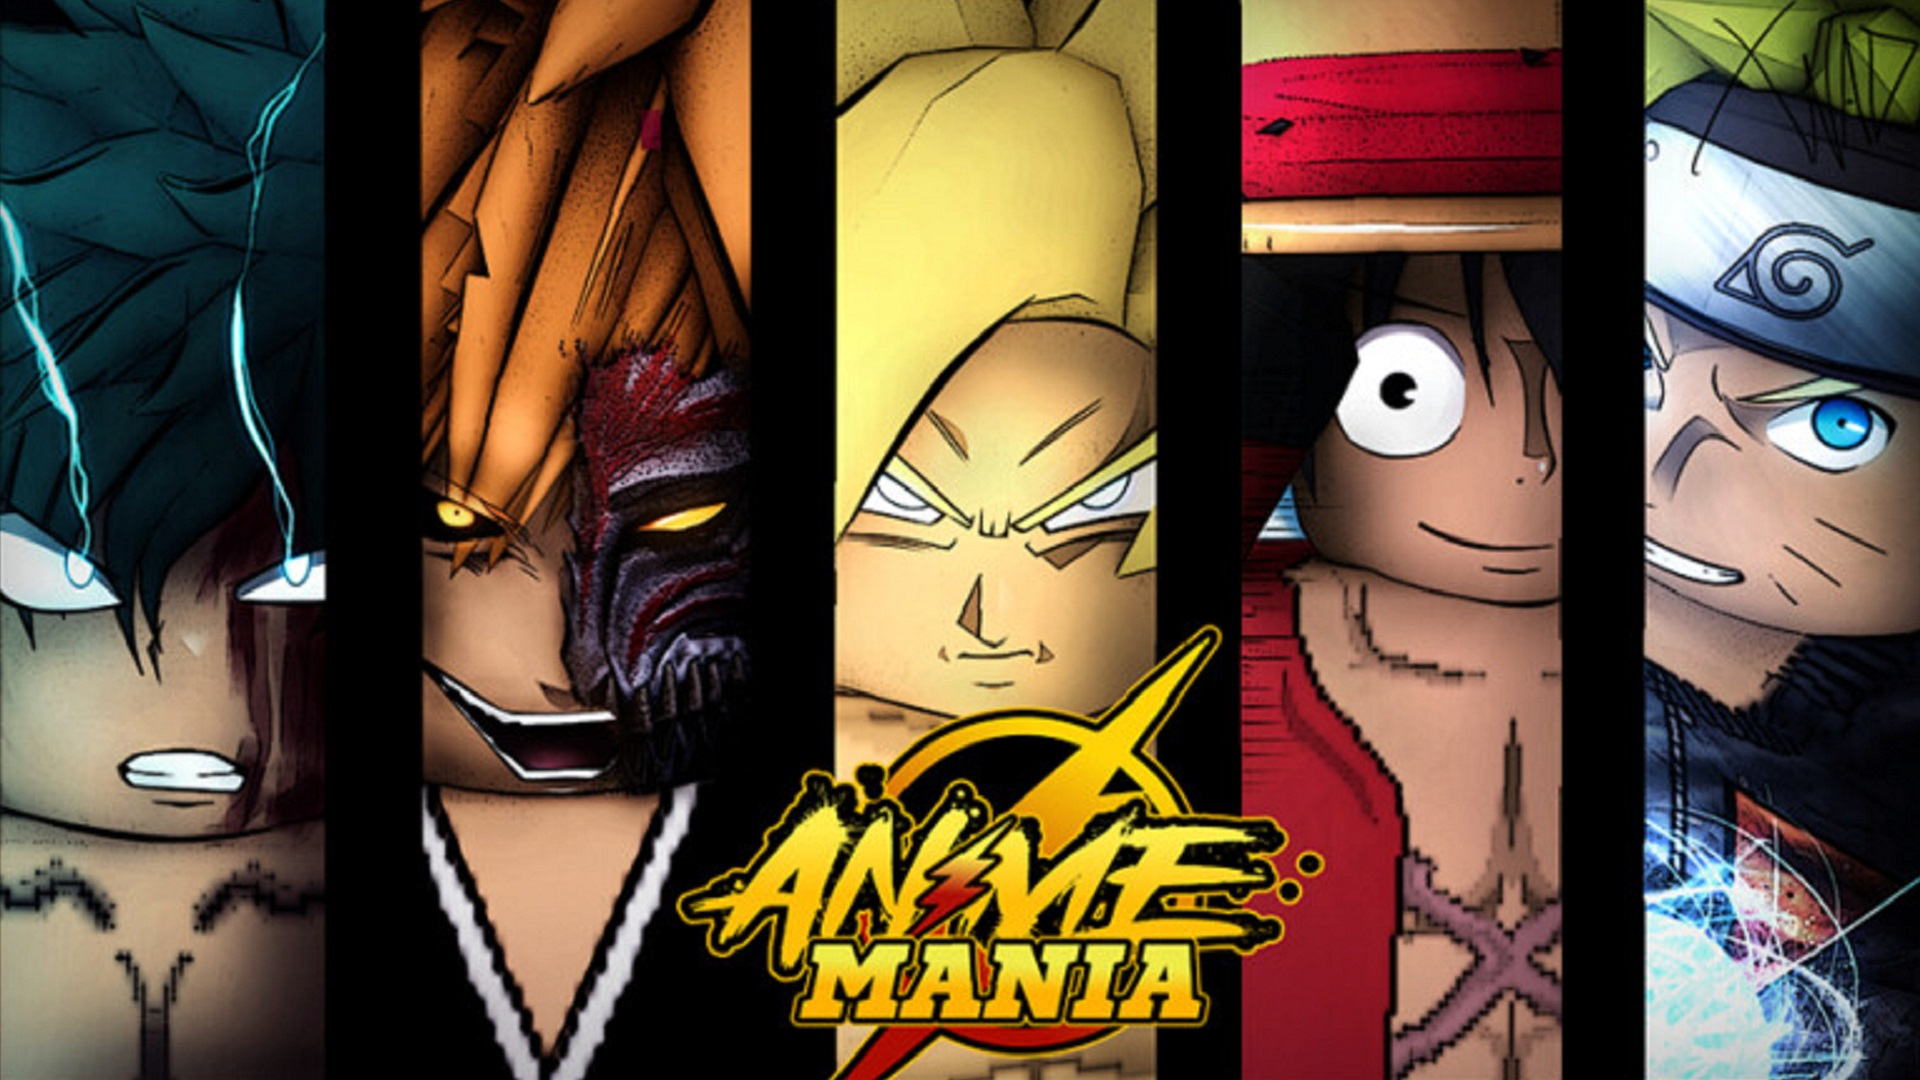 Anime Mania codes – free gold, gems, and more